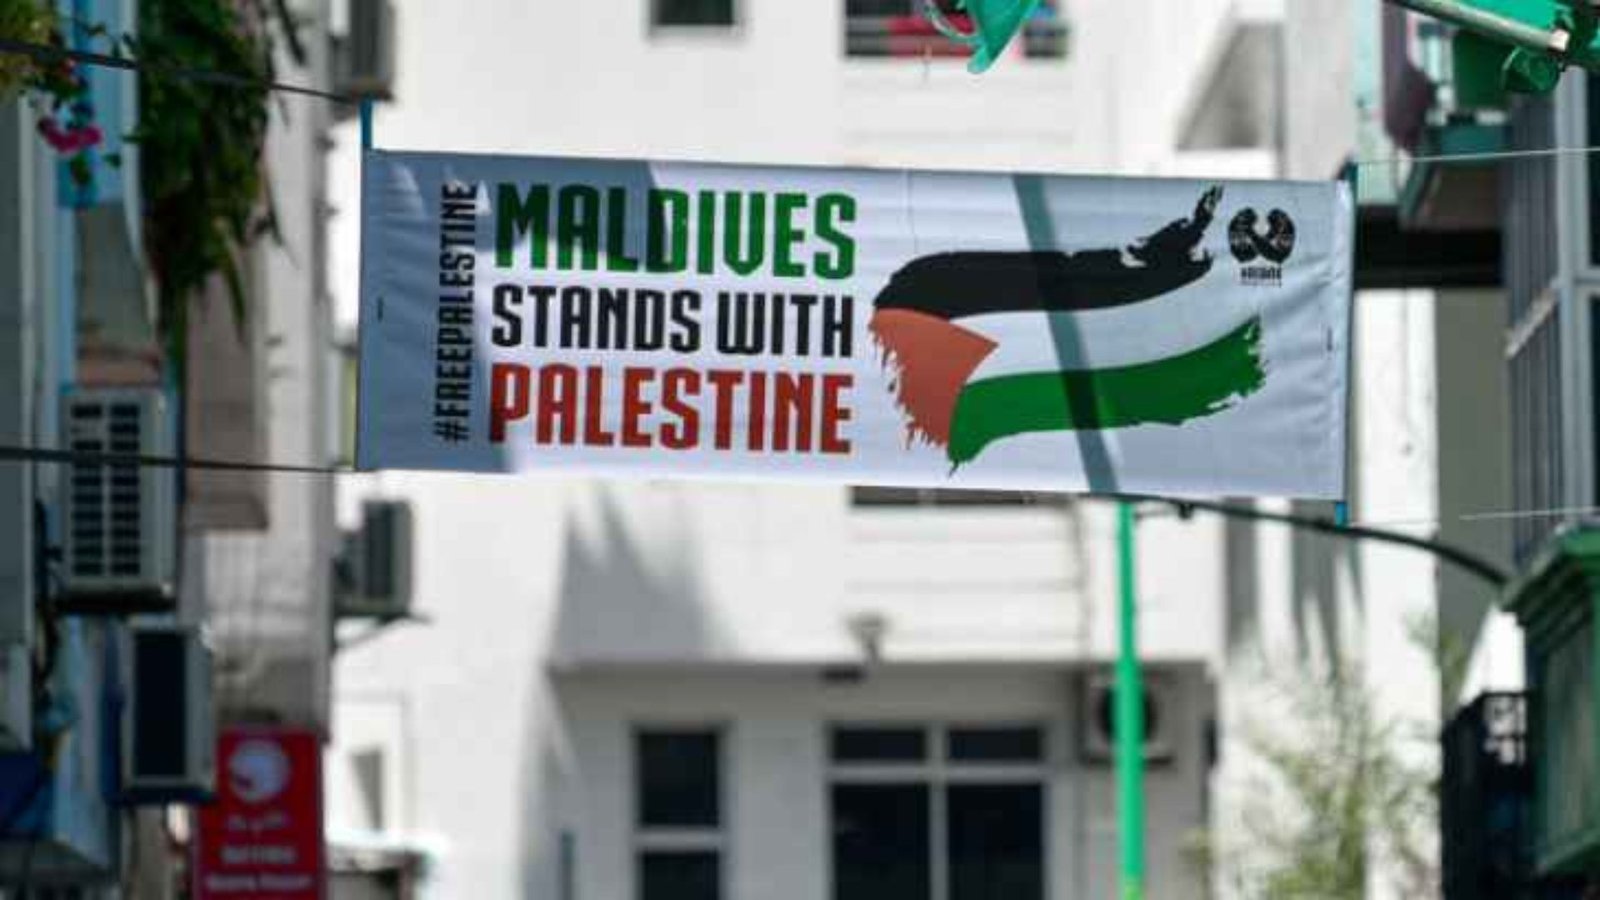 Maldives bans entry of Israelis in support of Palestine